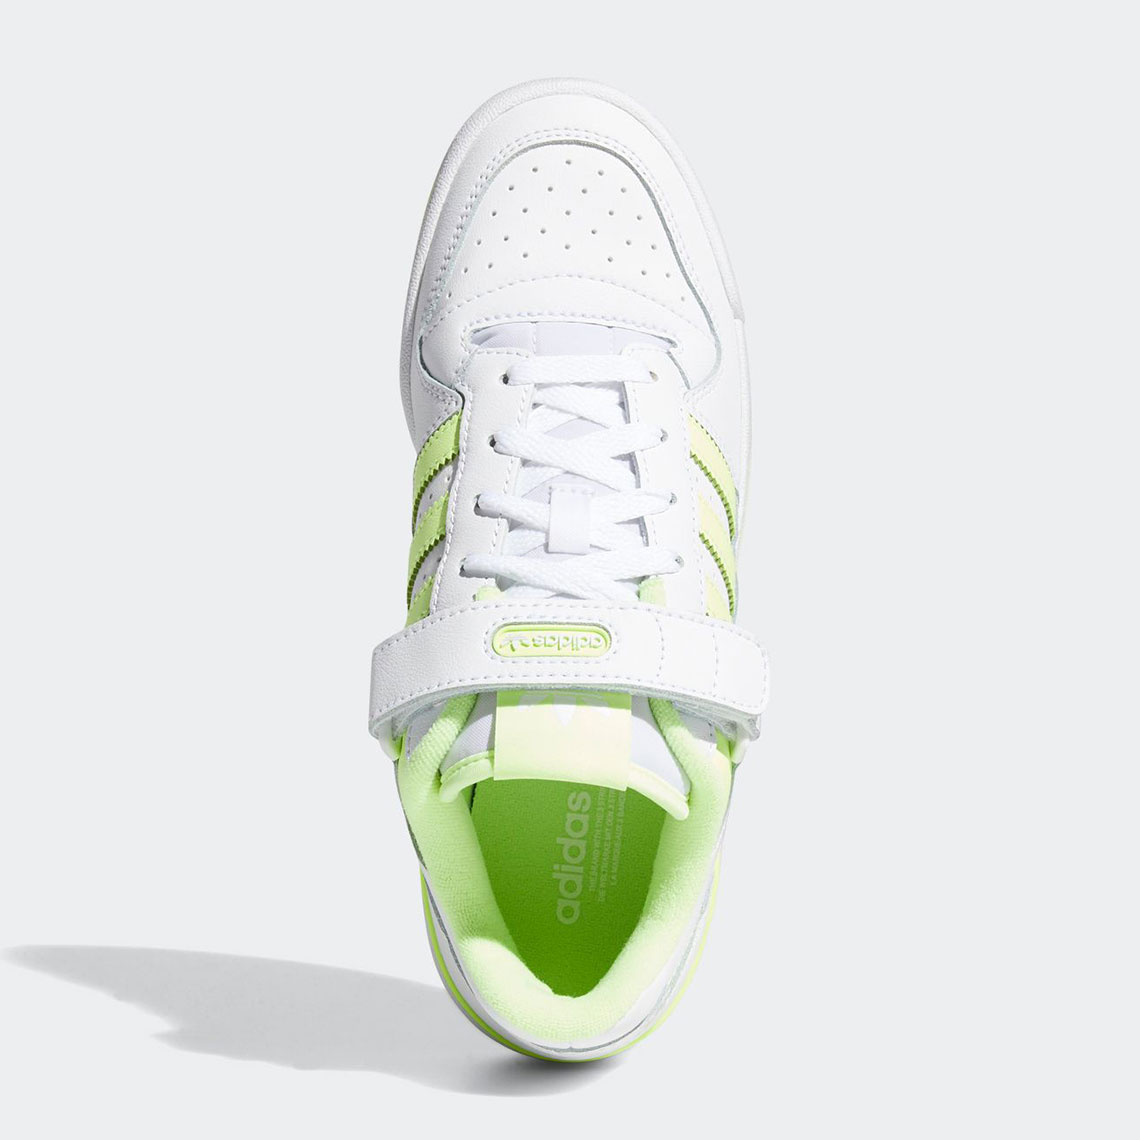 Adidas Forum Low Wmns White Footwear White Hi Res Yellow Fy5121 8